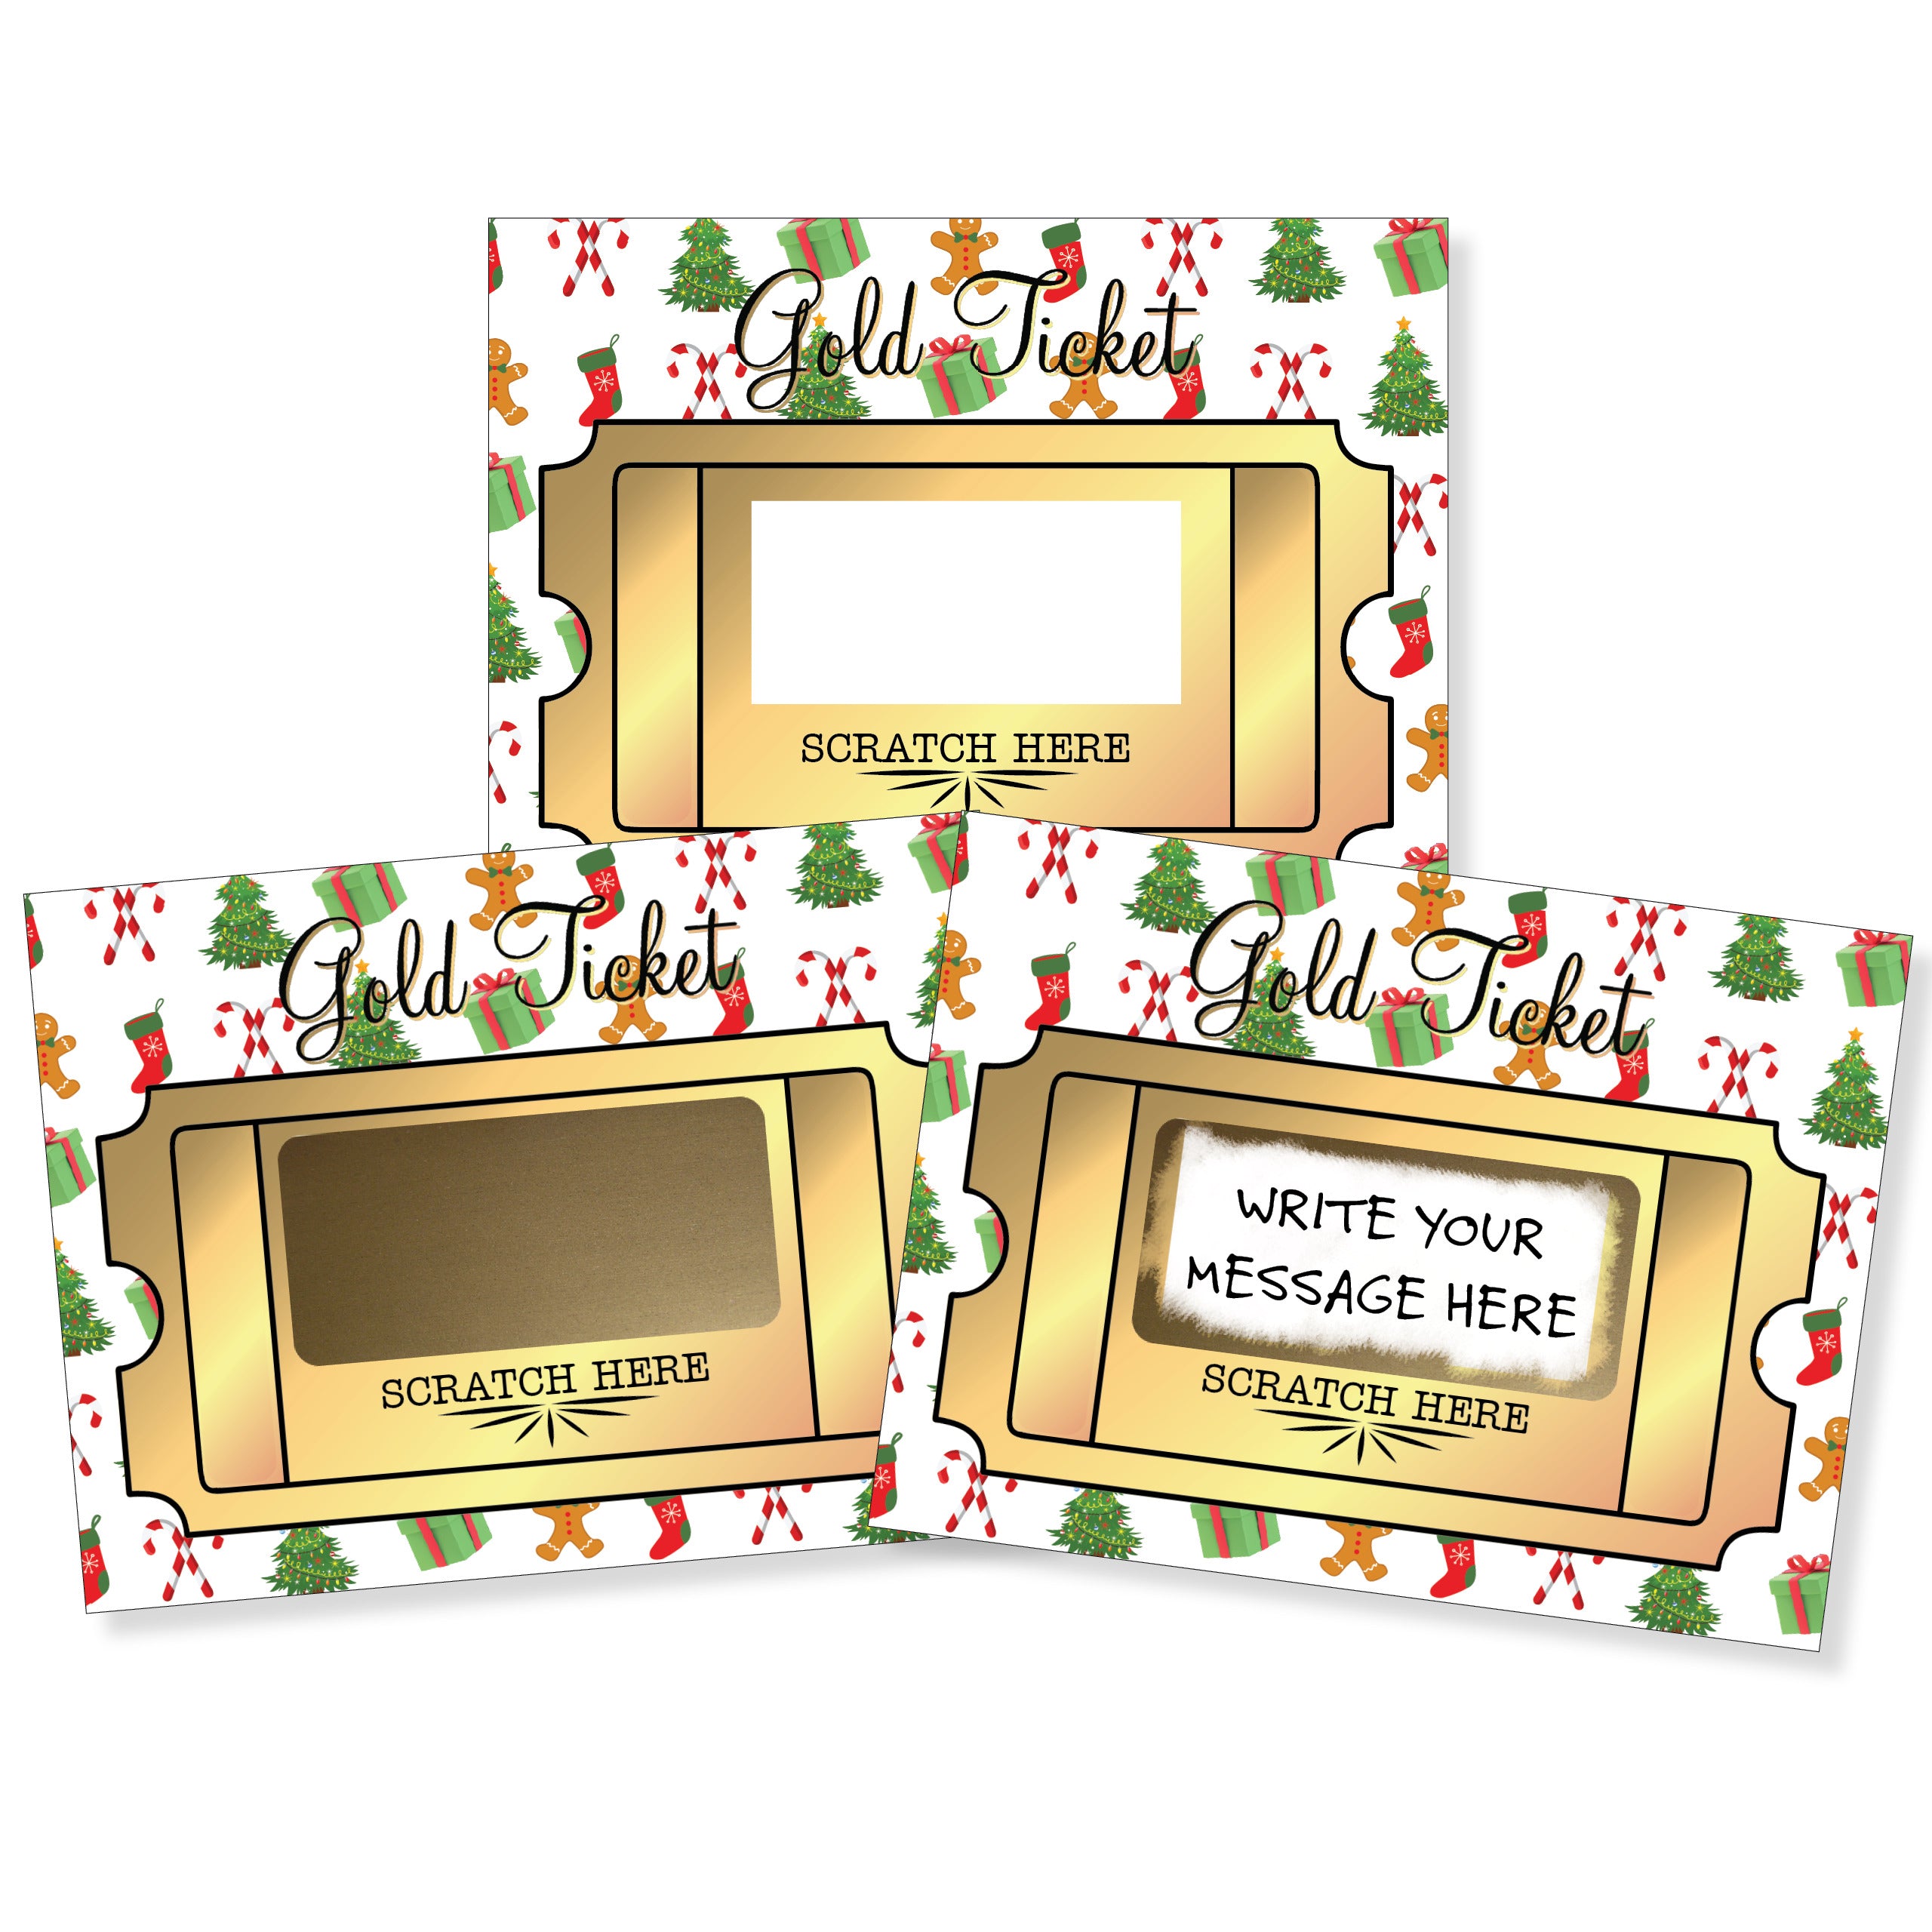 DIY Christmas Gold Ticket Classic Make Your Own Scratch Offs - 50 Cards and 50 Scratch Off Stickers